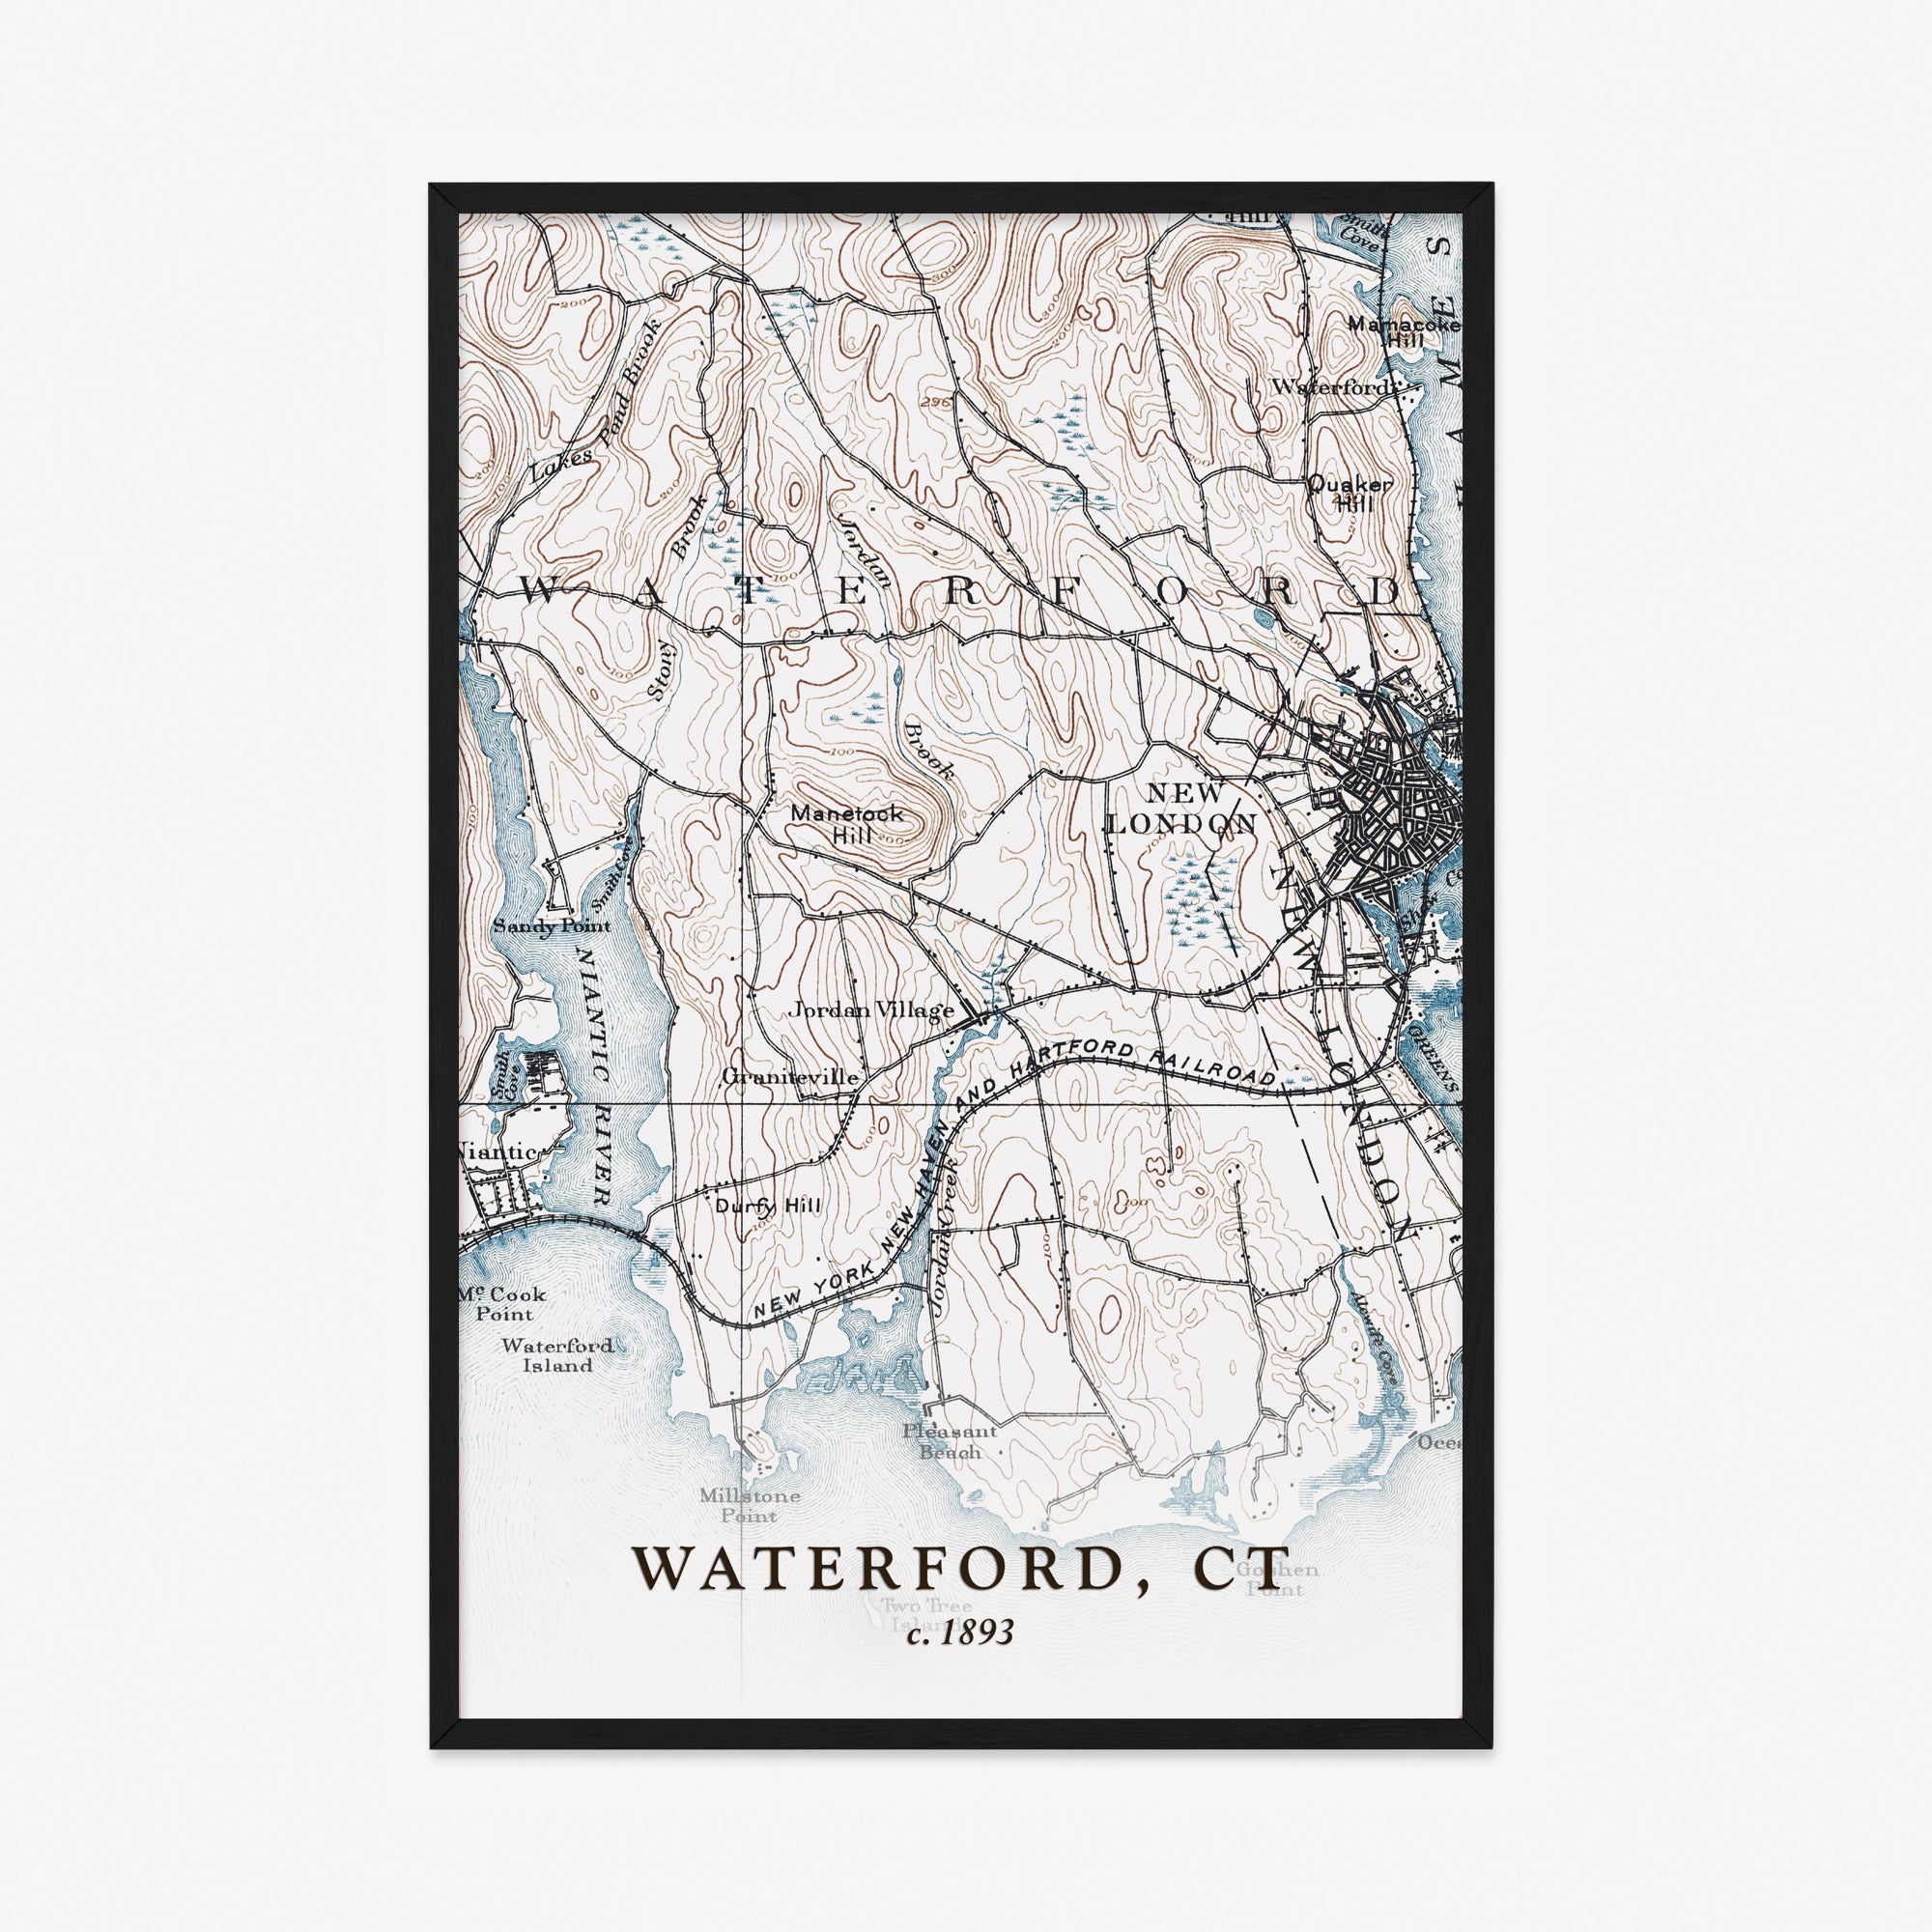 Waterford, CT - 1893 Topographic Map